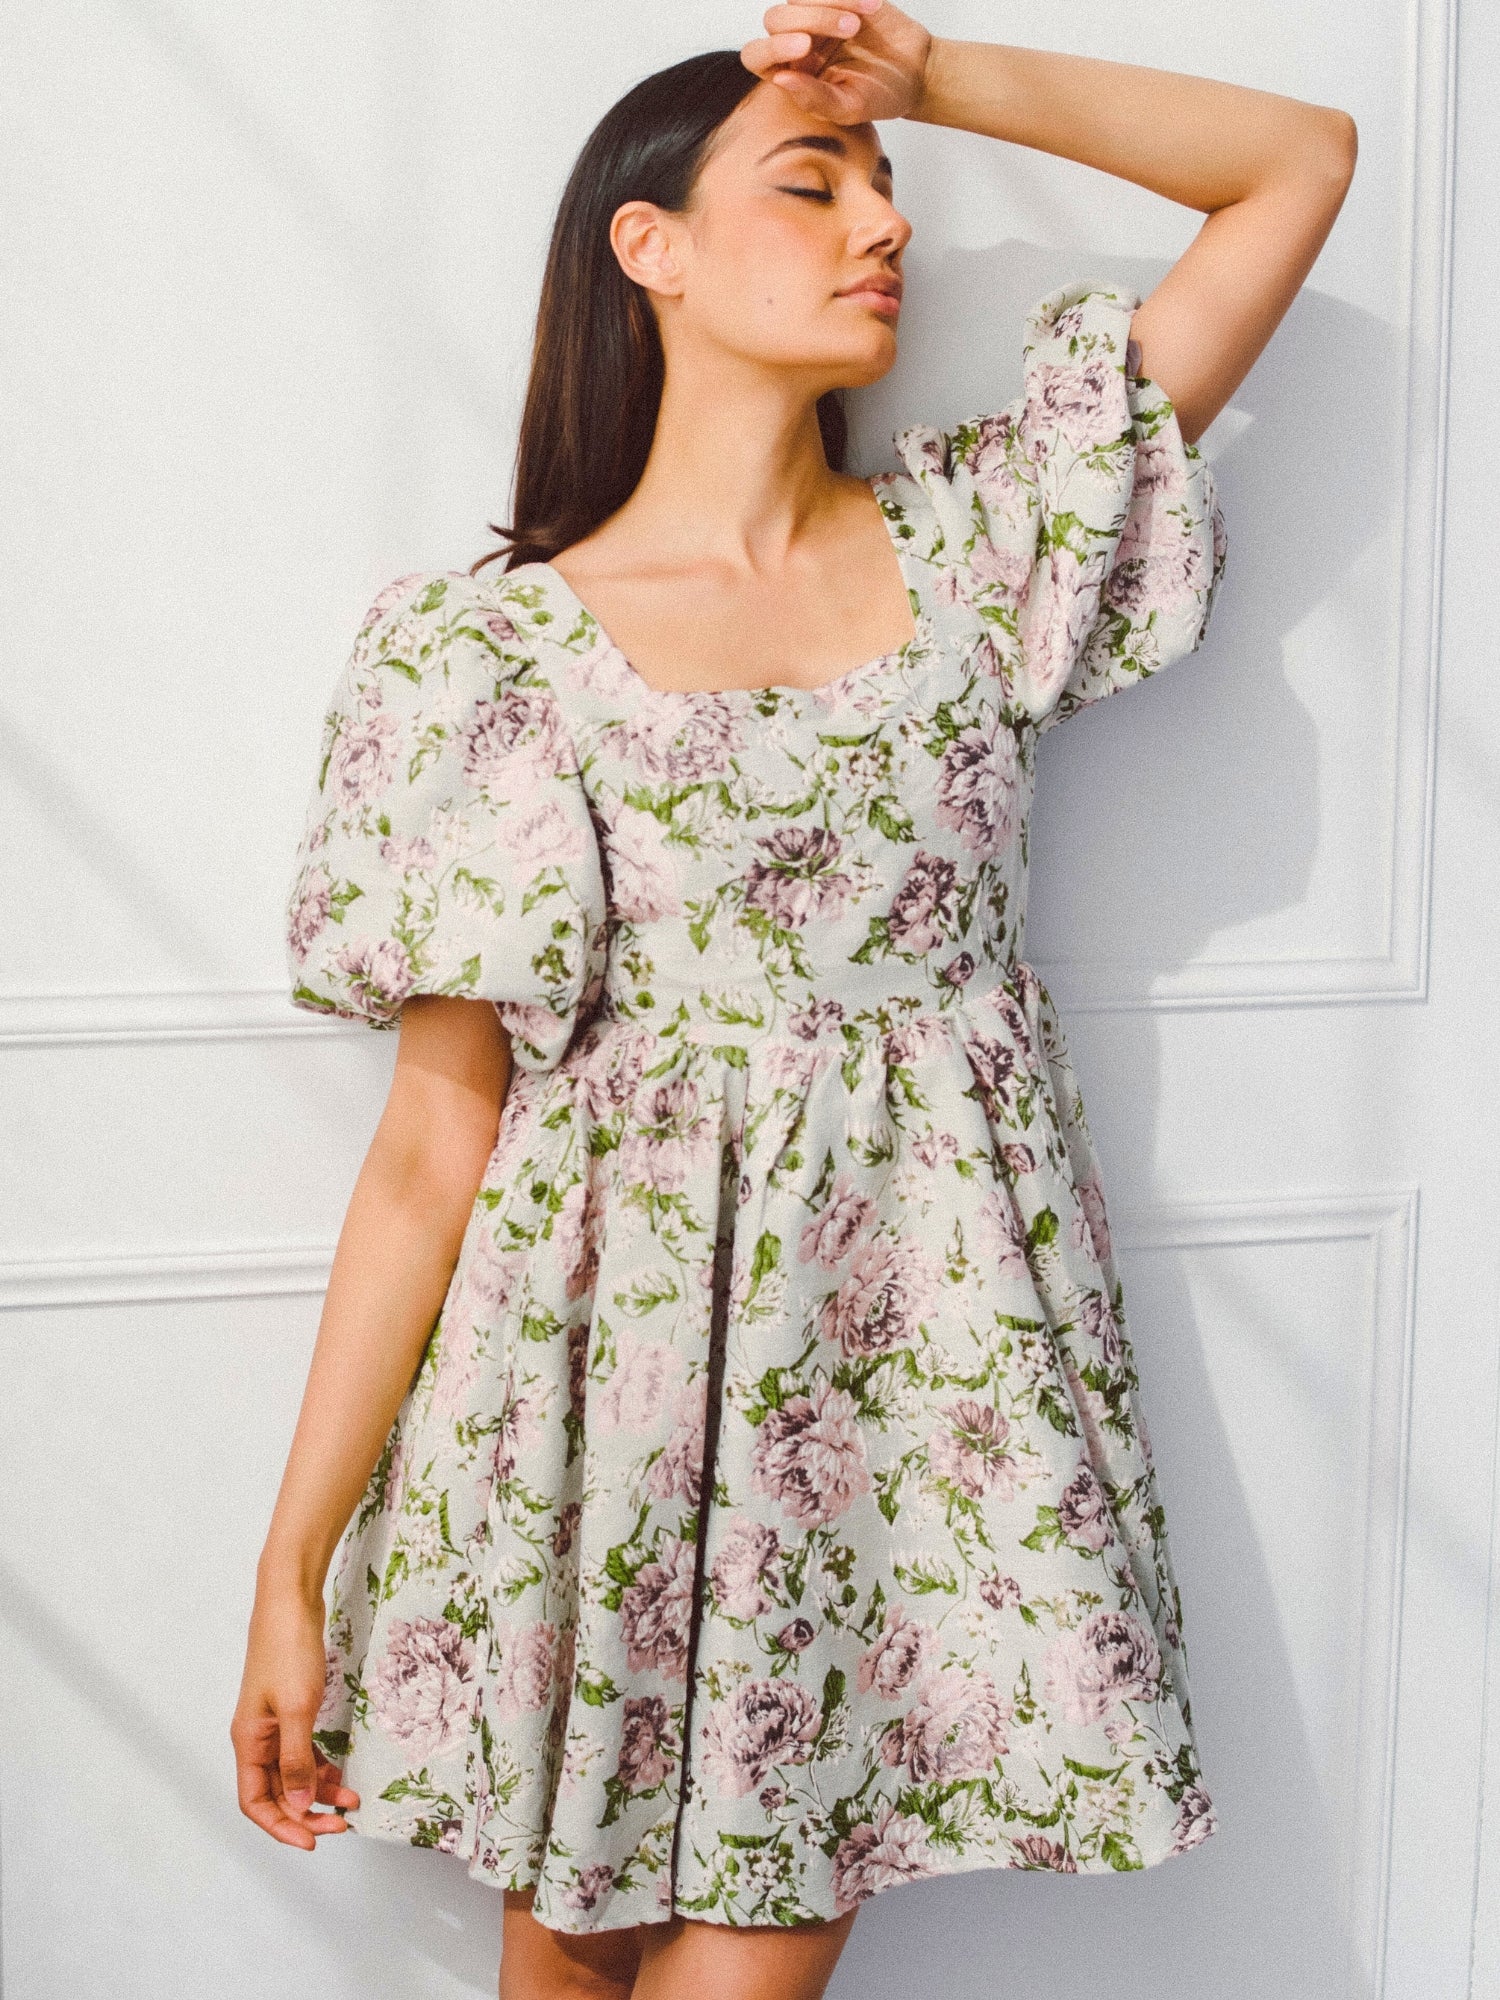 The Meadow Tapestry Mini Dress, Dress, Sister Jane - Ivory Sheep Collection Limited